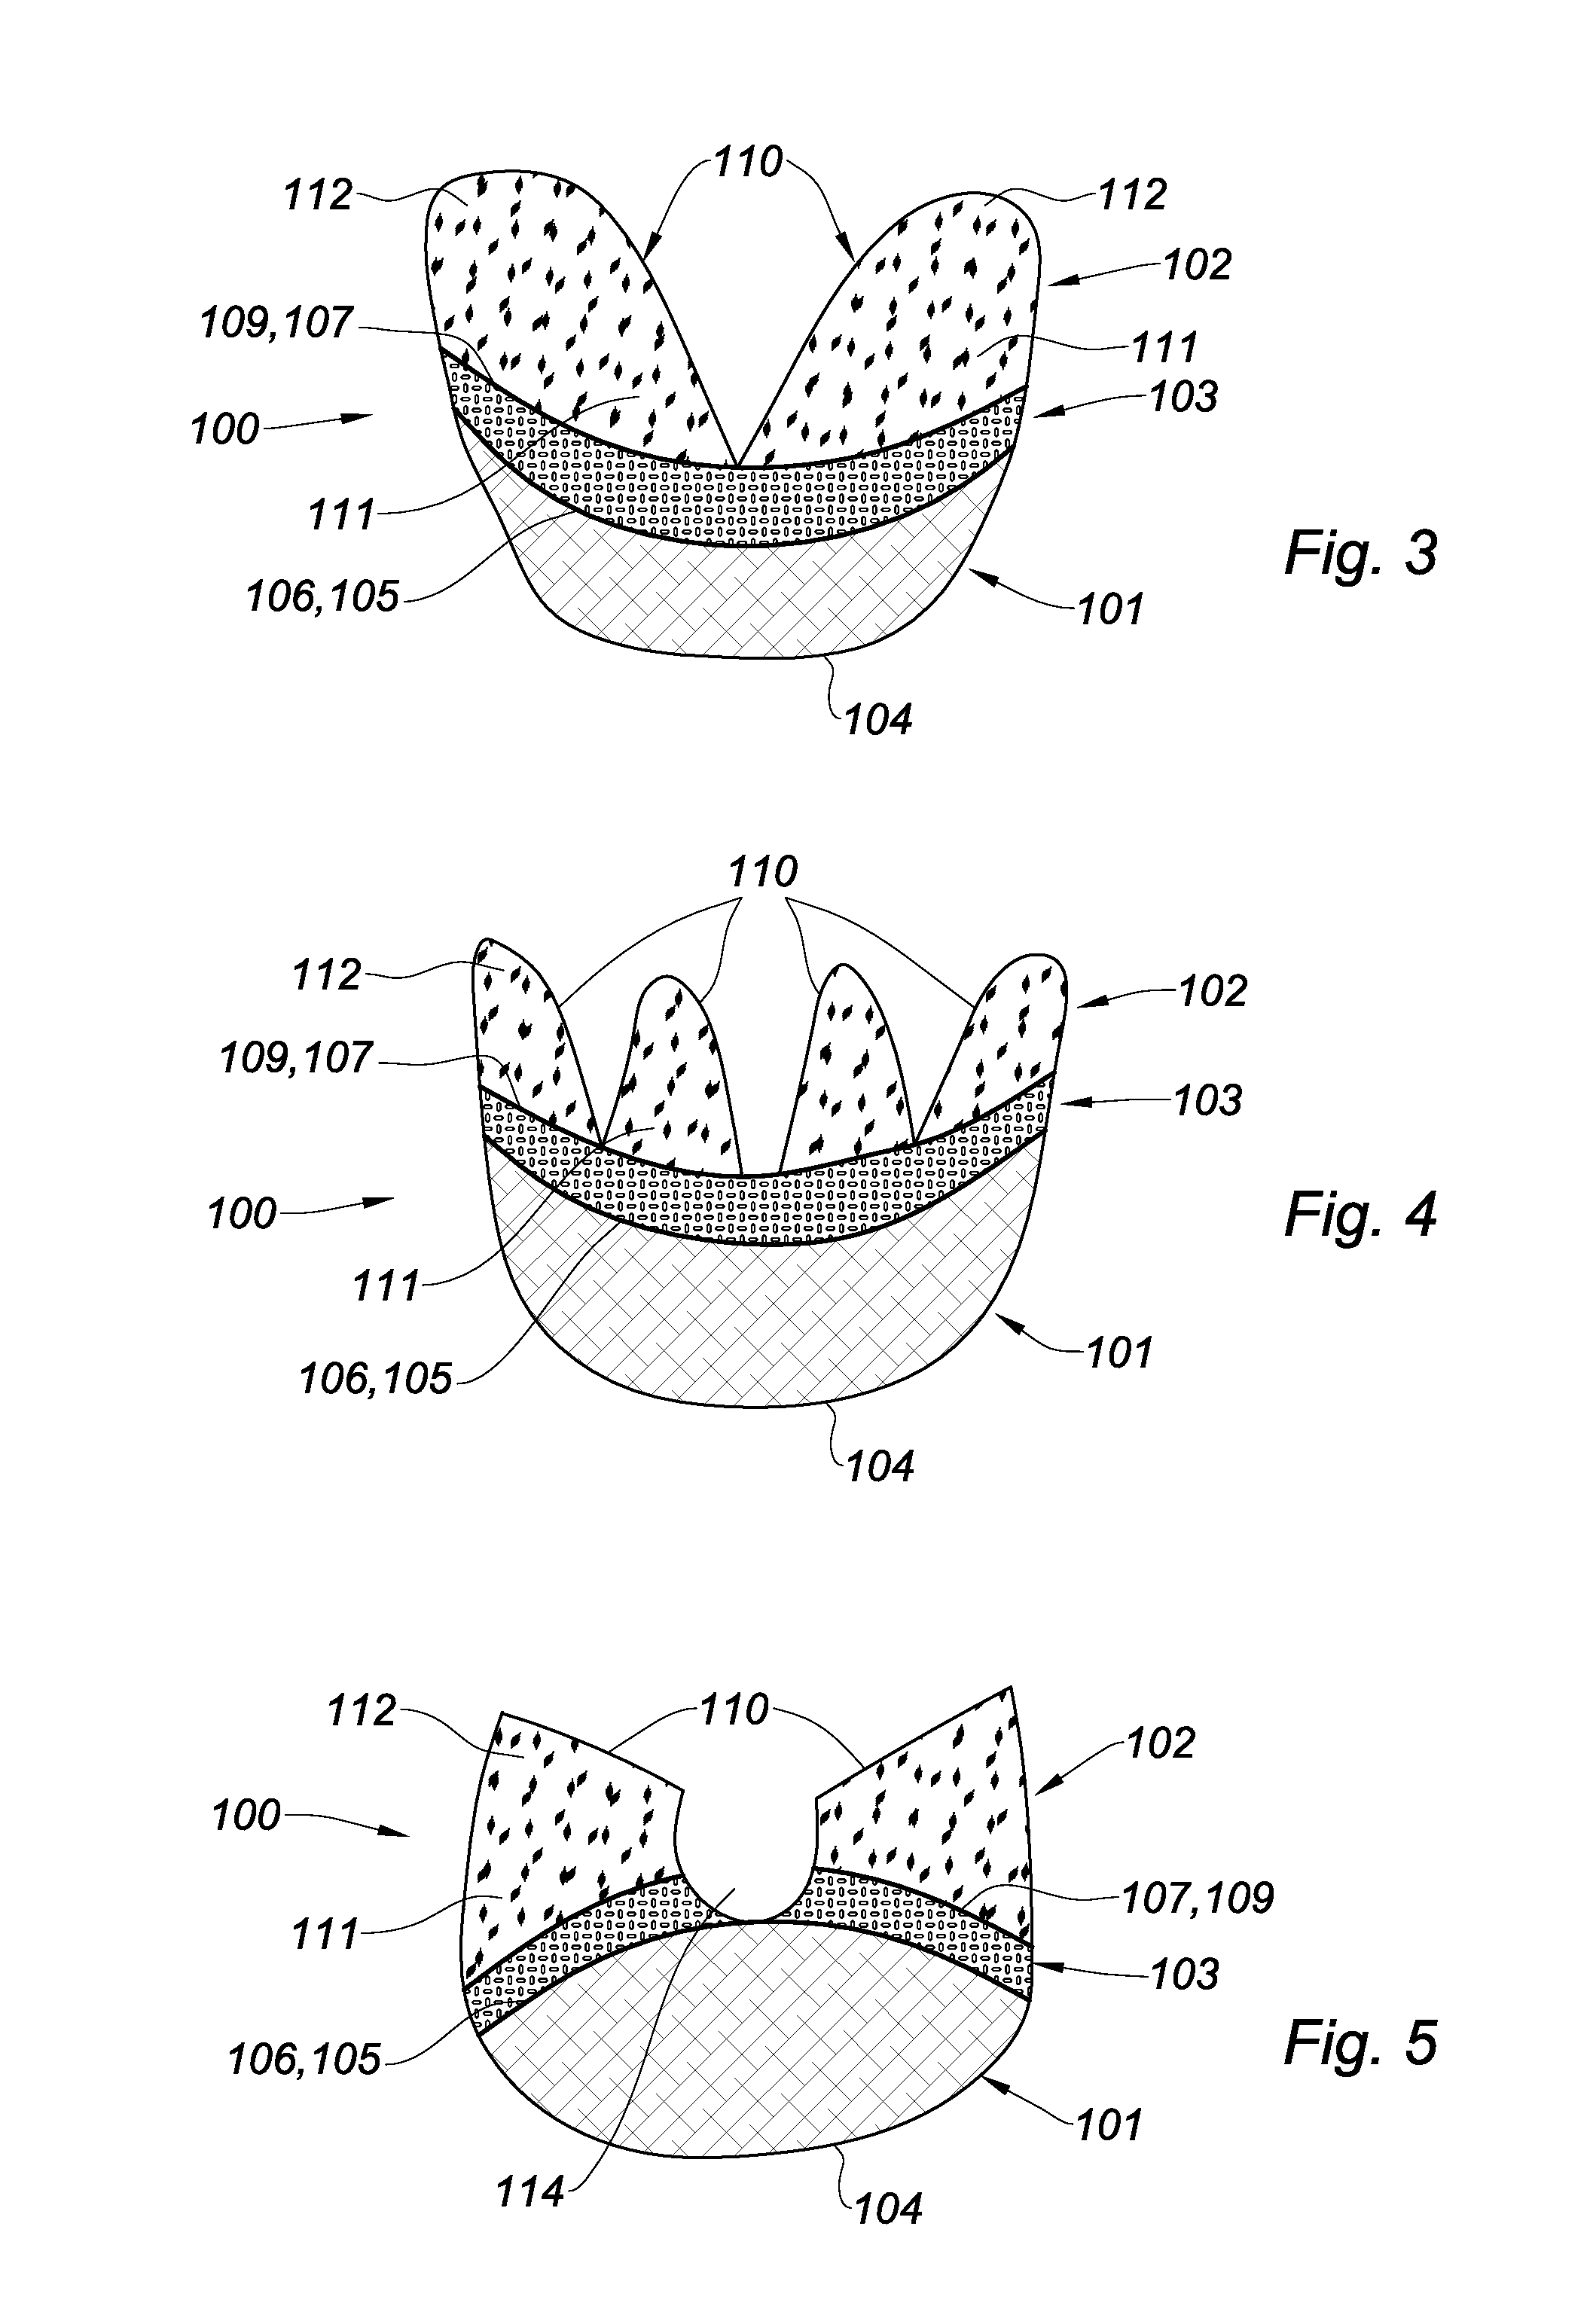 Prosthesis for supporting a breast structure